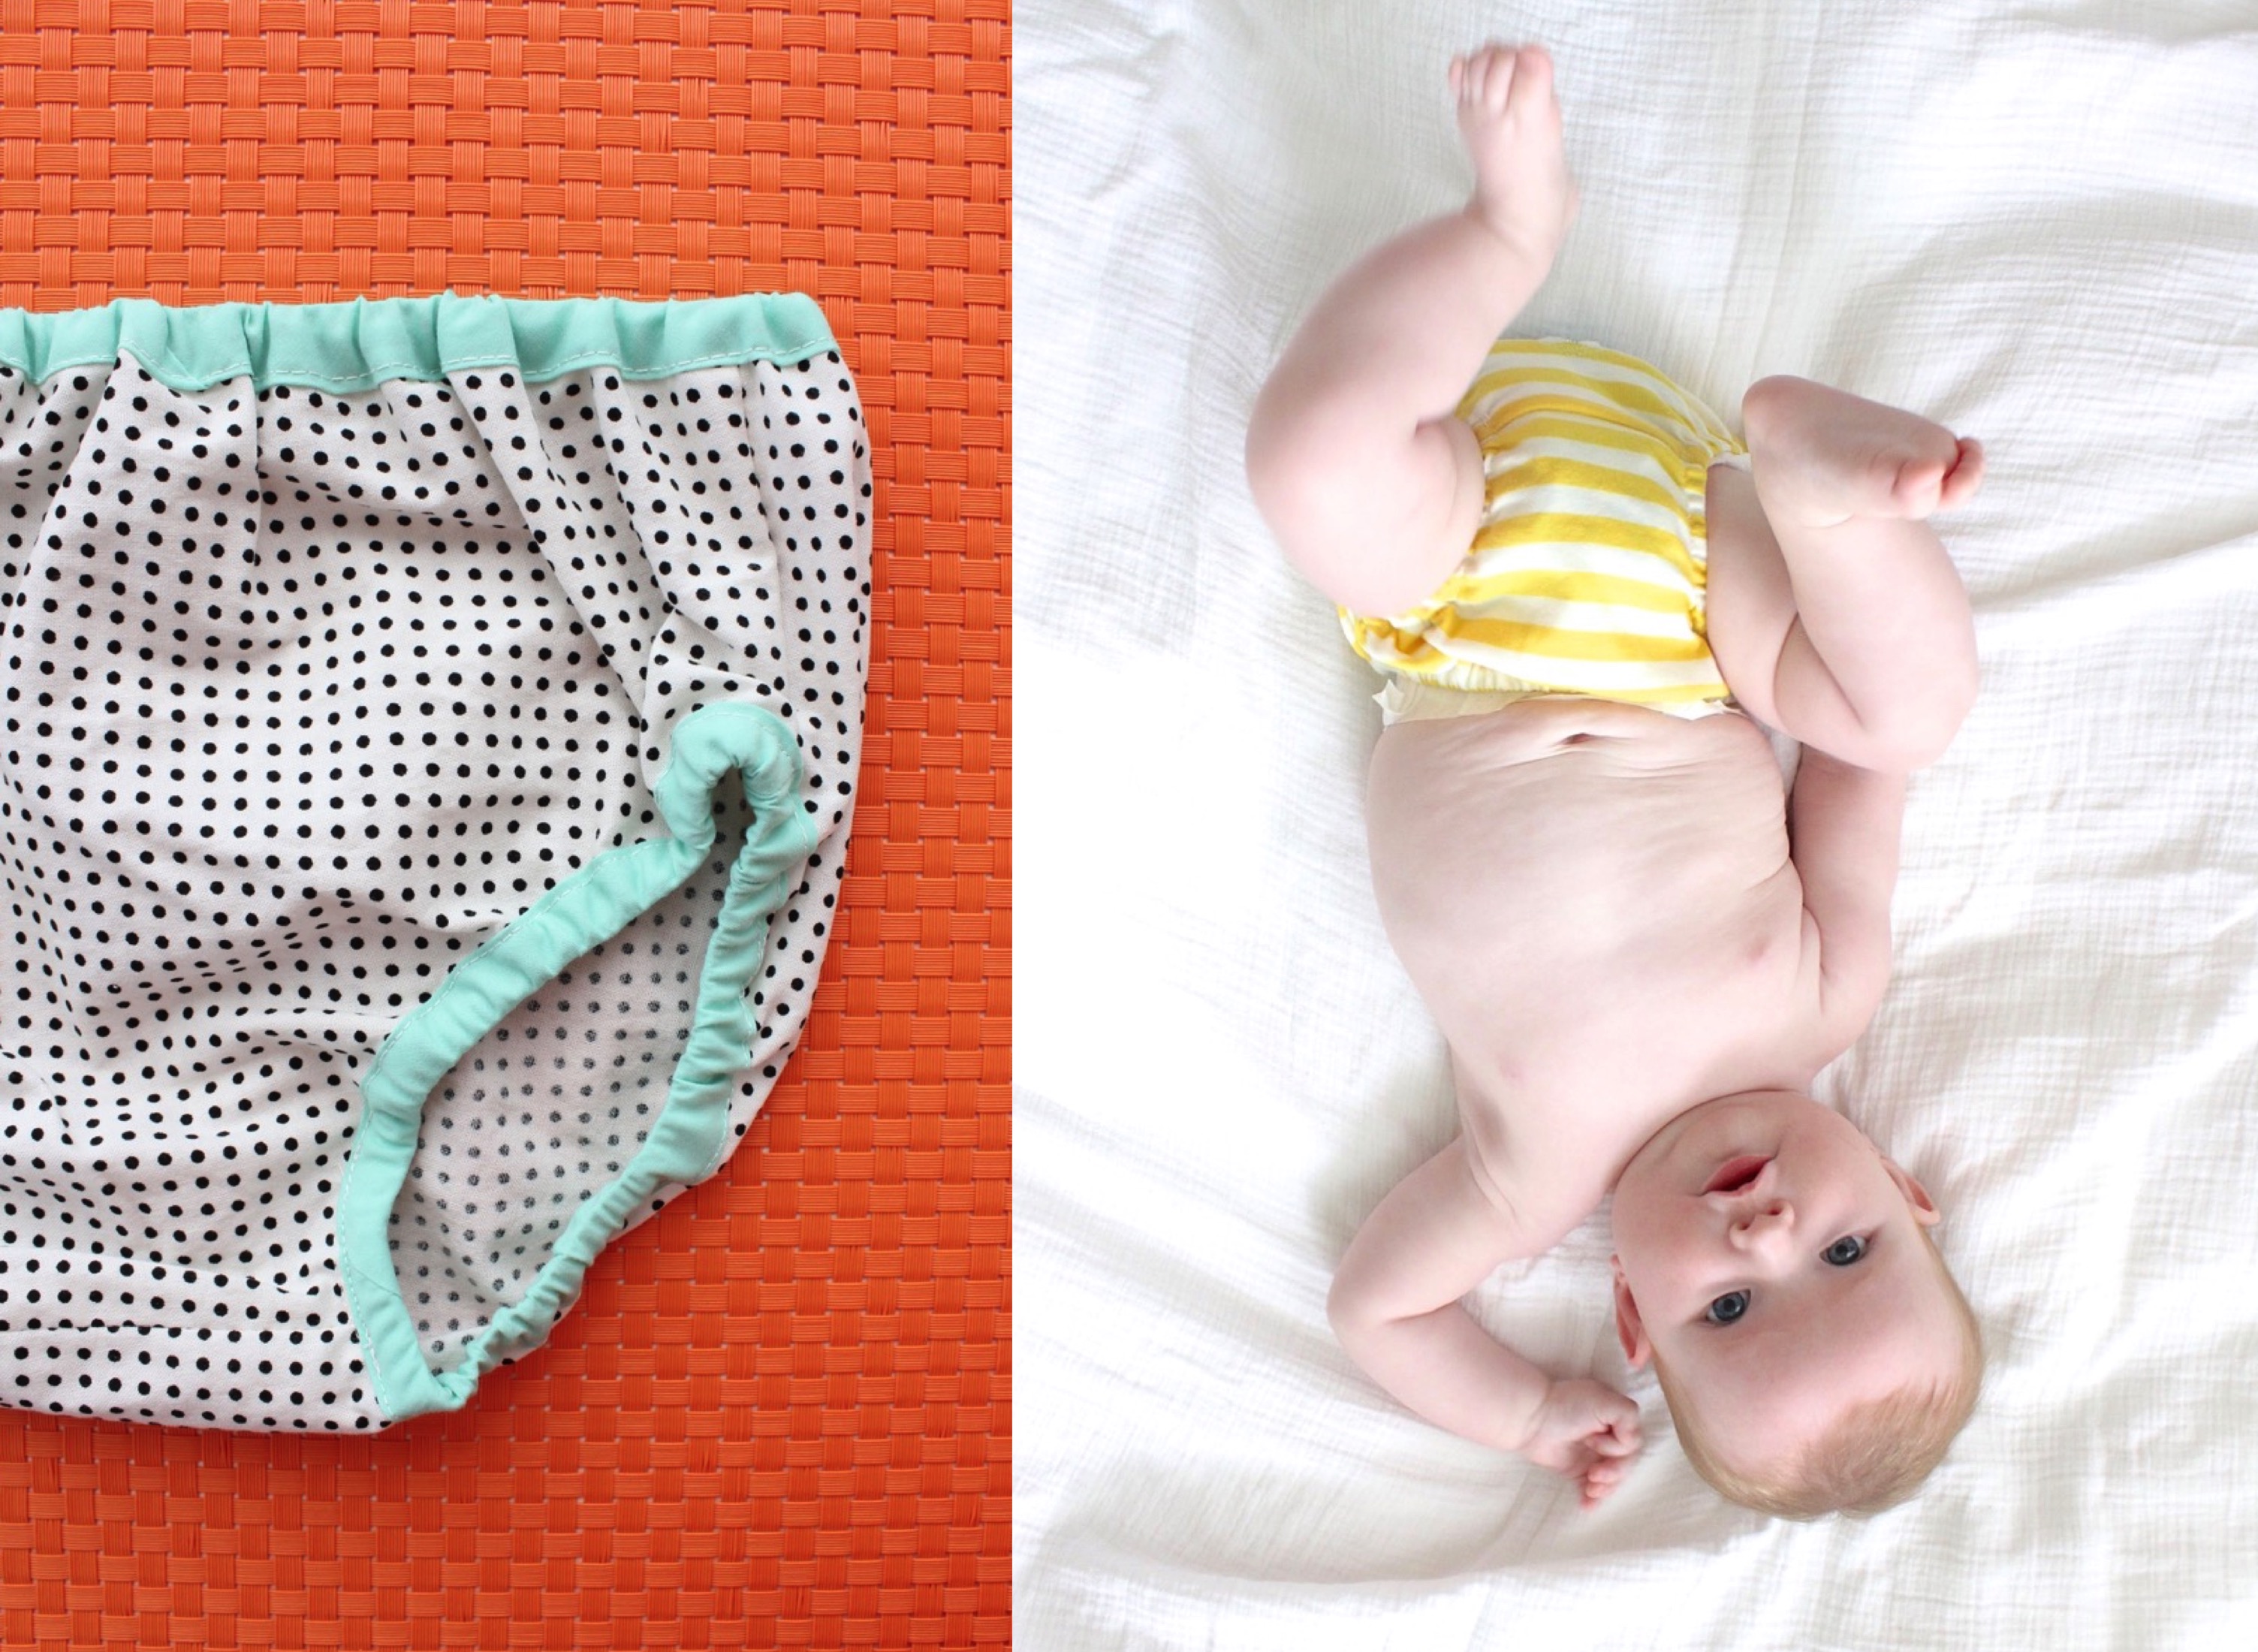 https://www.madeeveryday.com/wp-content/uploads/2015/05/the-Perfect-Diaper-and-Nappy-Cover-tutorial-by-MADE.jpg